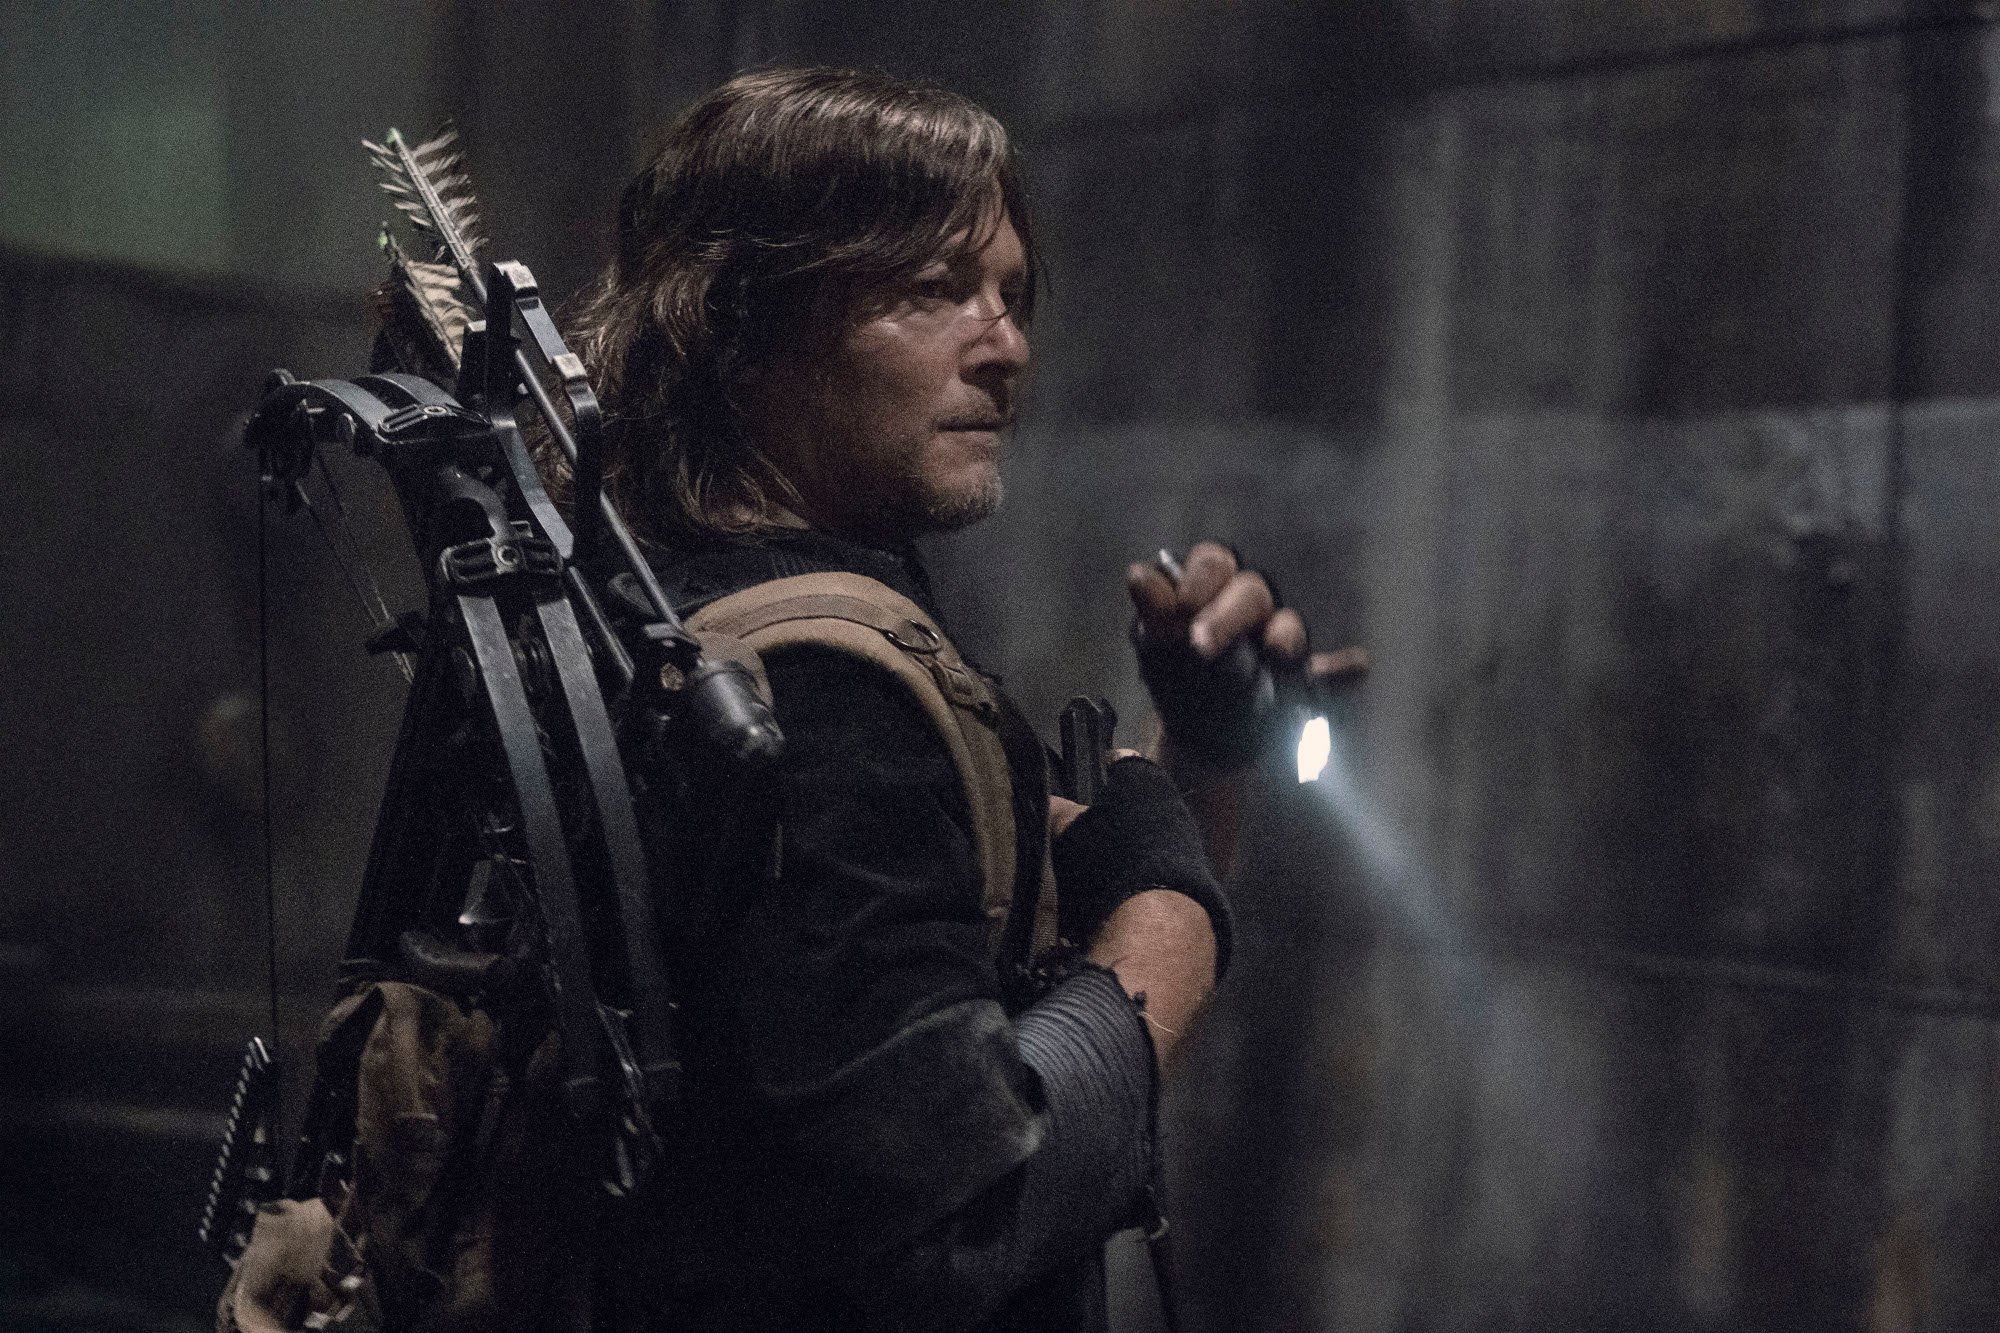 Norman Reedus in 'The Walking Dead' Season 11 standing in the dark, holding a knife, and looking over his shoulder